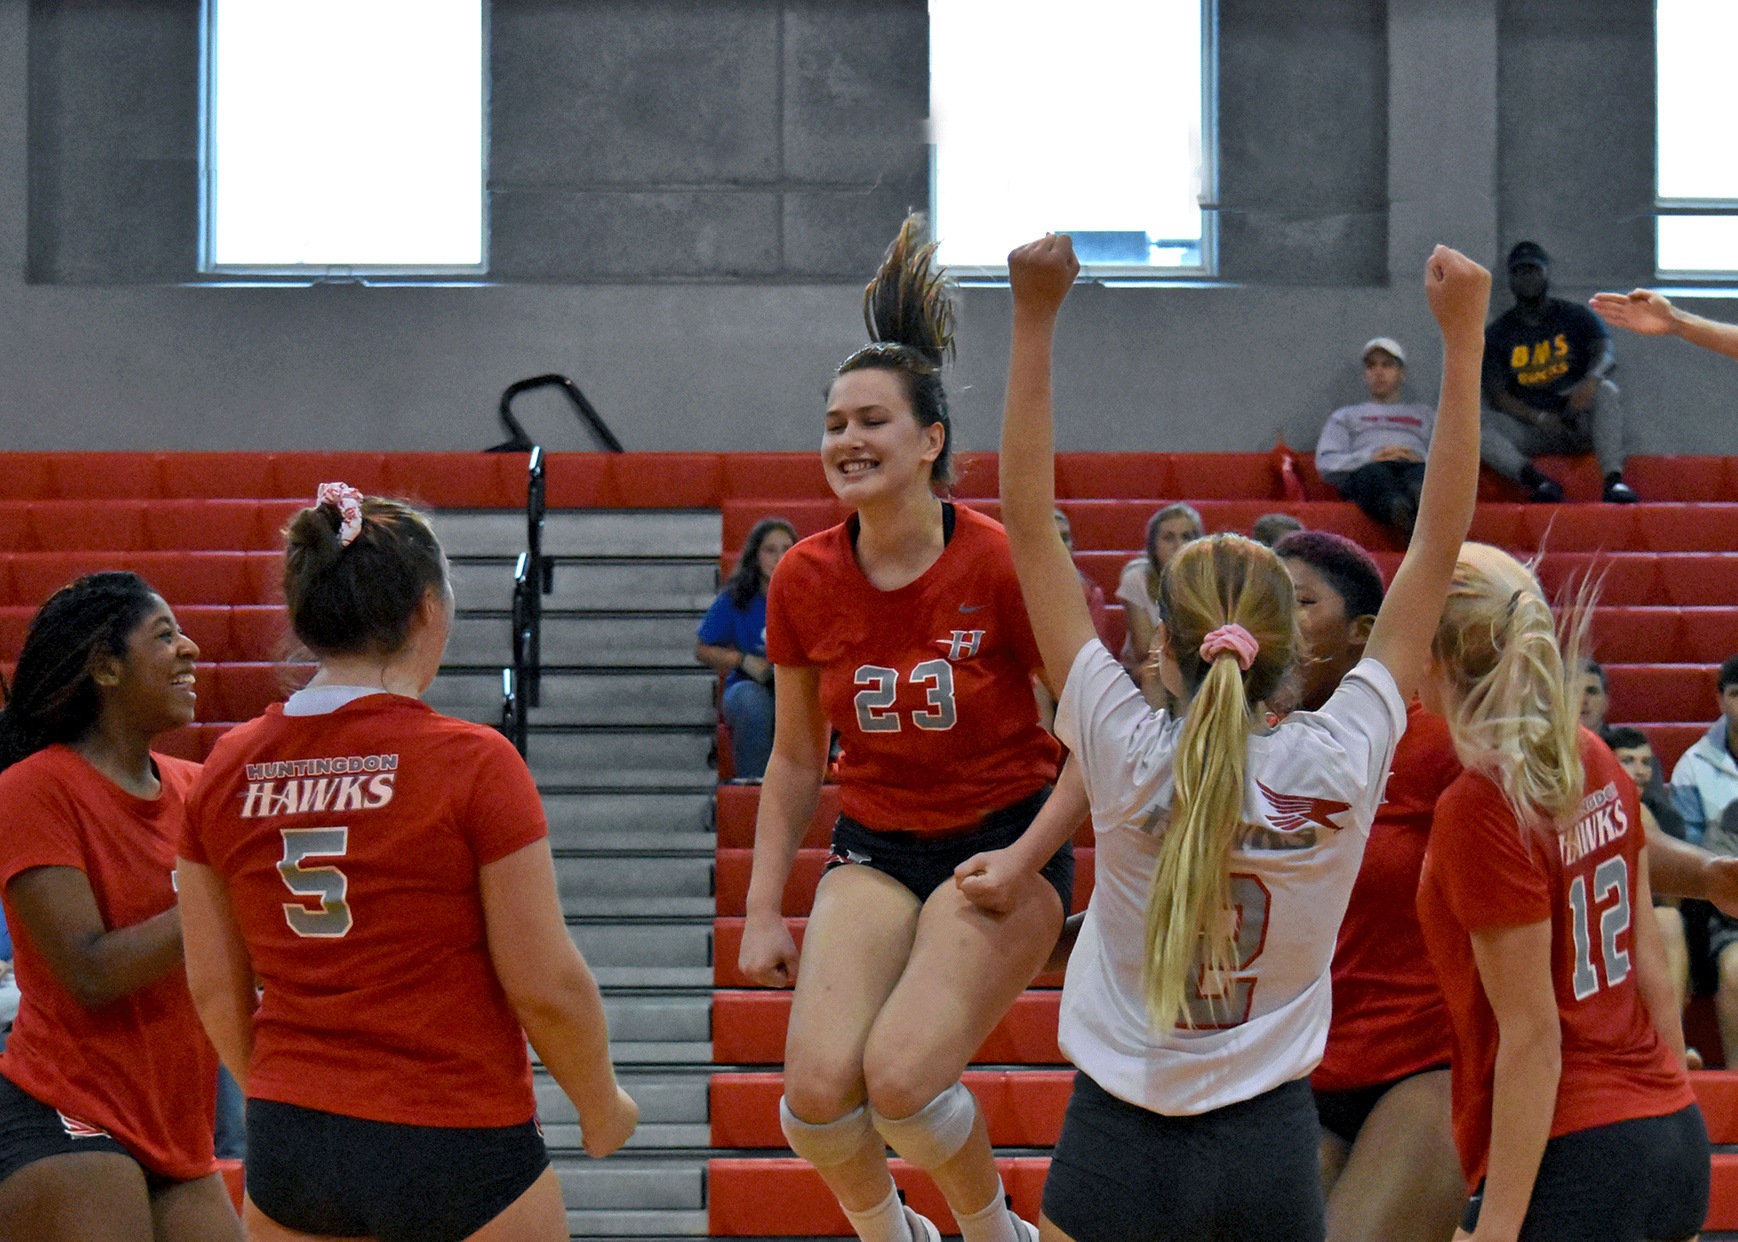 The Huntingdon volleyball team swept Covenant and Agnes Scott in a conference tri-match on Saturday. With a 20-9 record, this is the first time the Hawks have reached 20 wins since 2005.